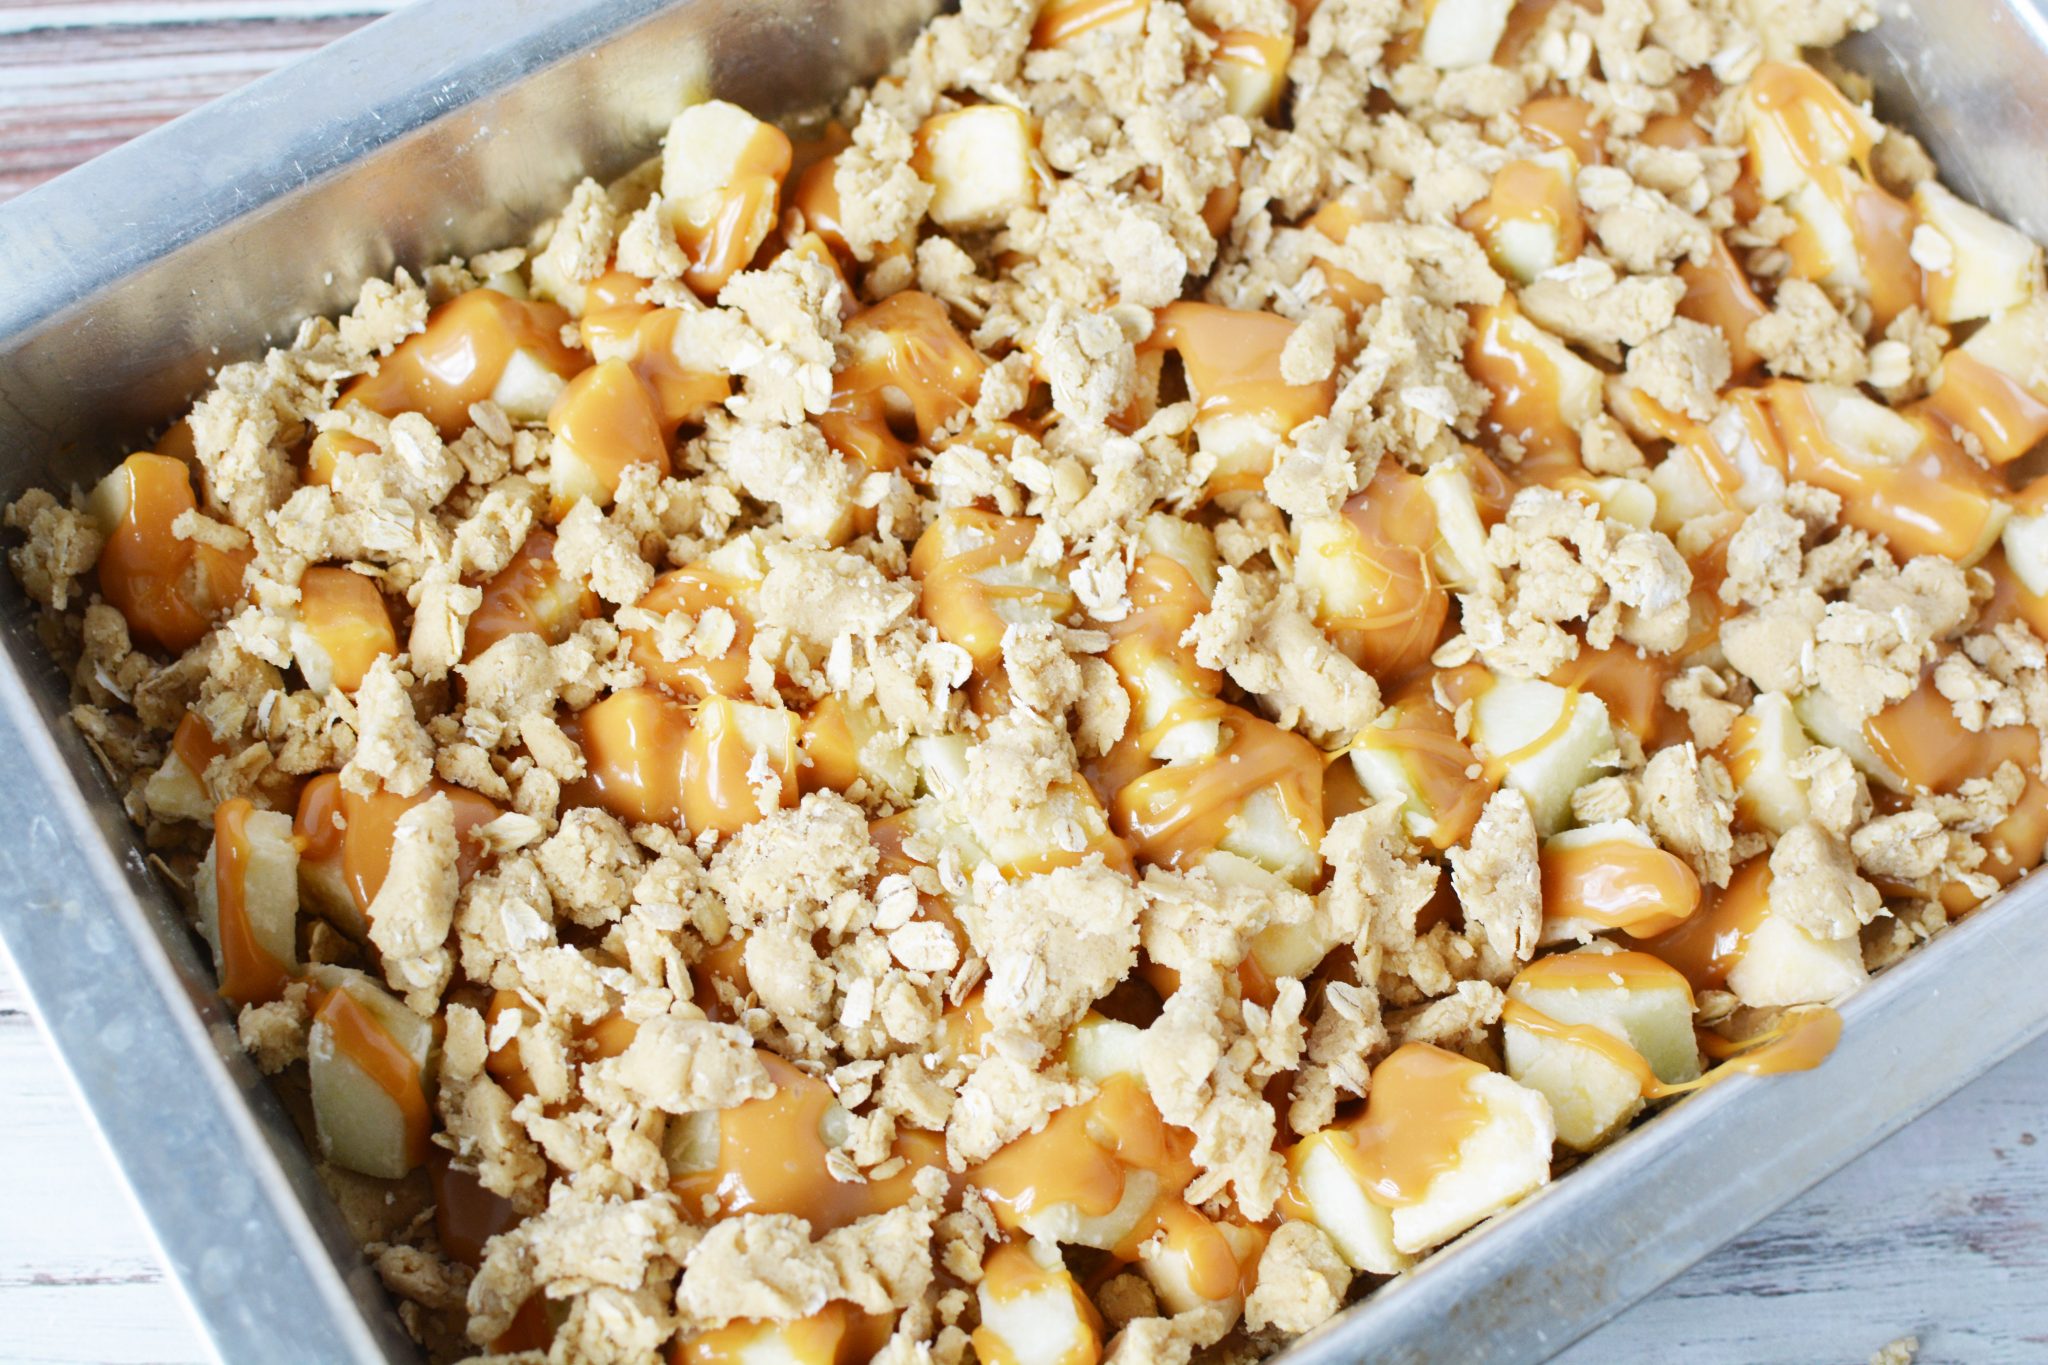 oatmeal crust with apples and caramel in a baking pan with oatmeal crisp on top